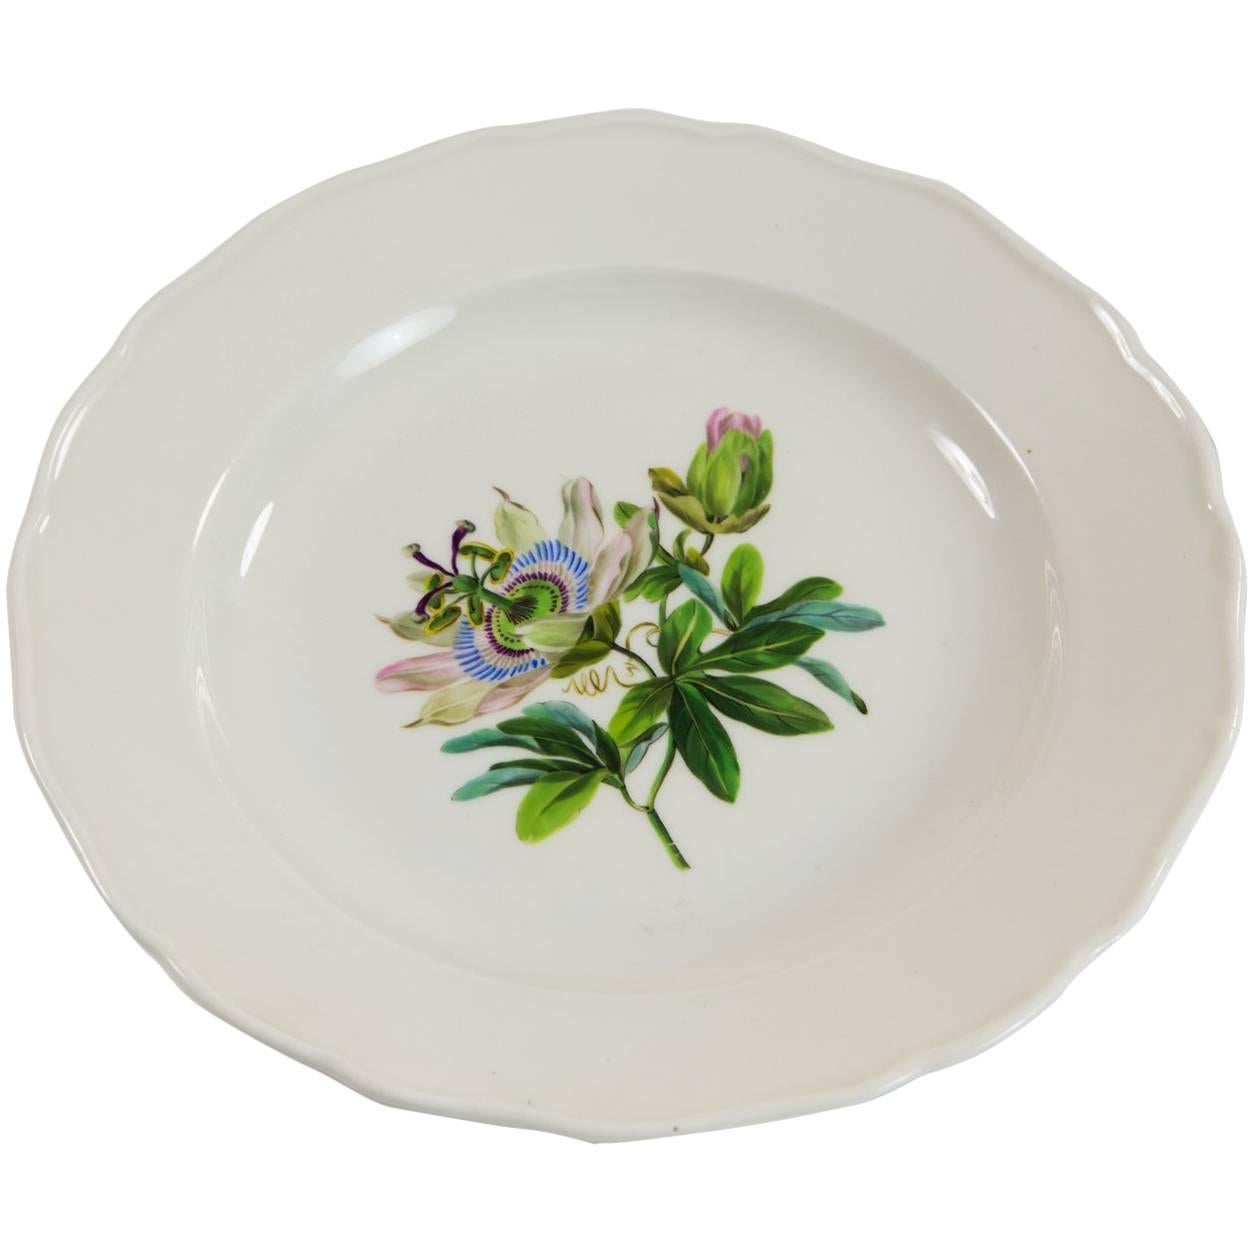 Early 20th Century Meissen Plate with Passion Flower